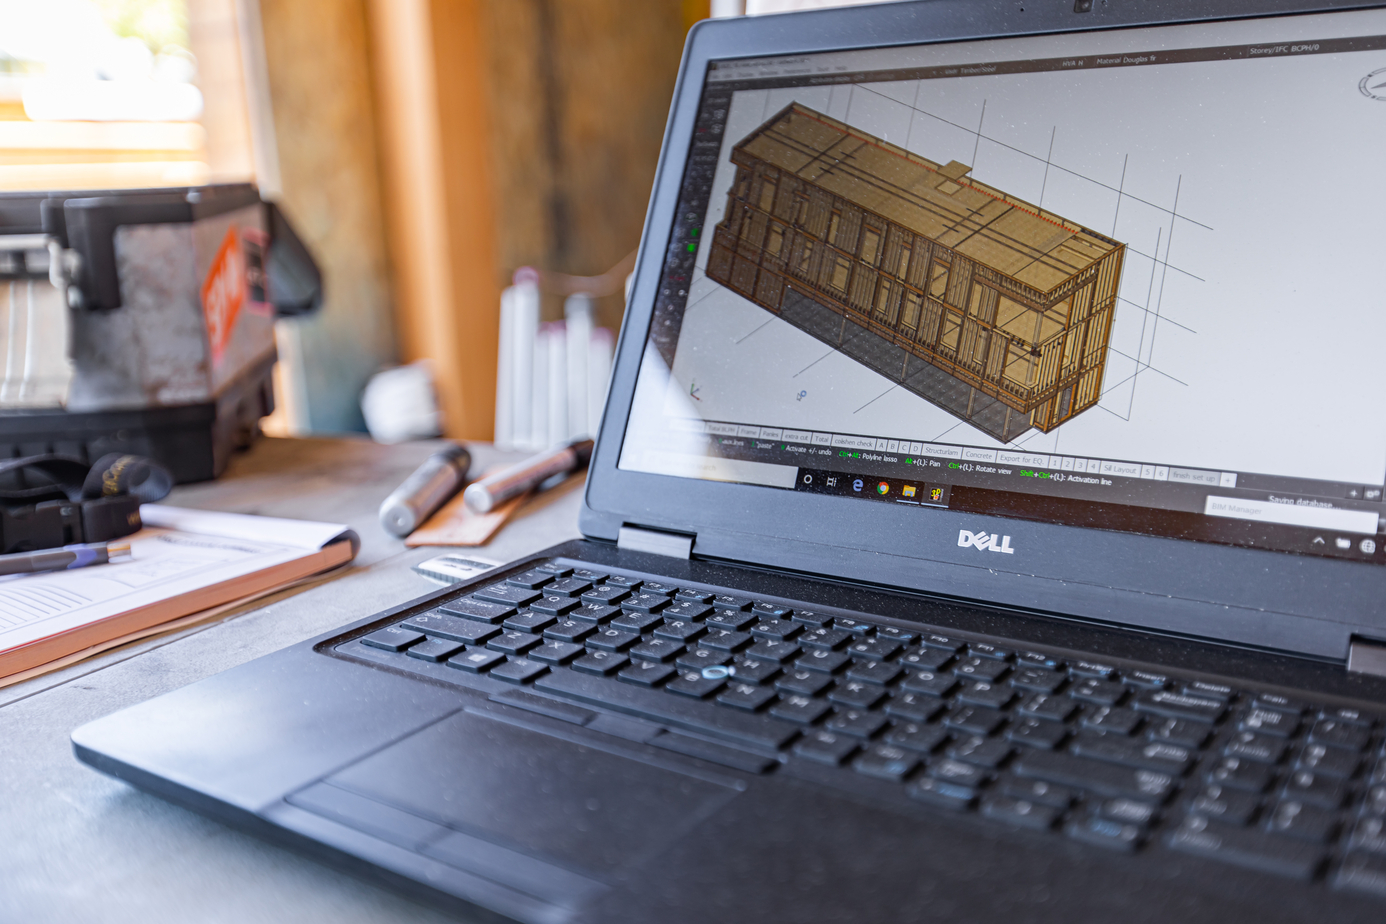 Open laptop with the plans for a wood building design showing on the screen